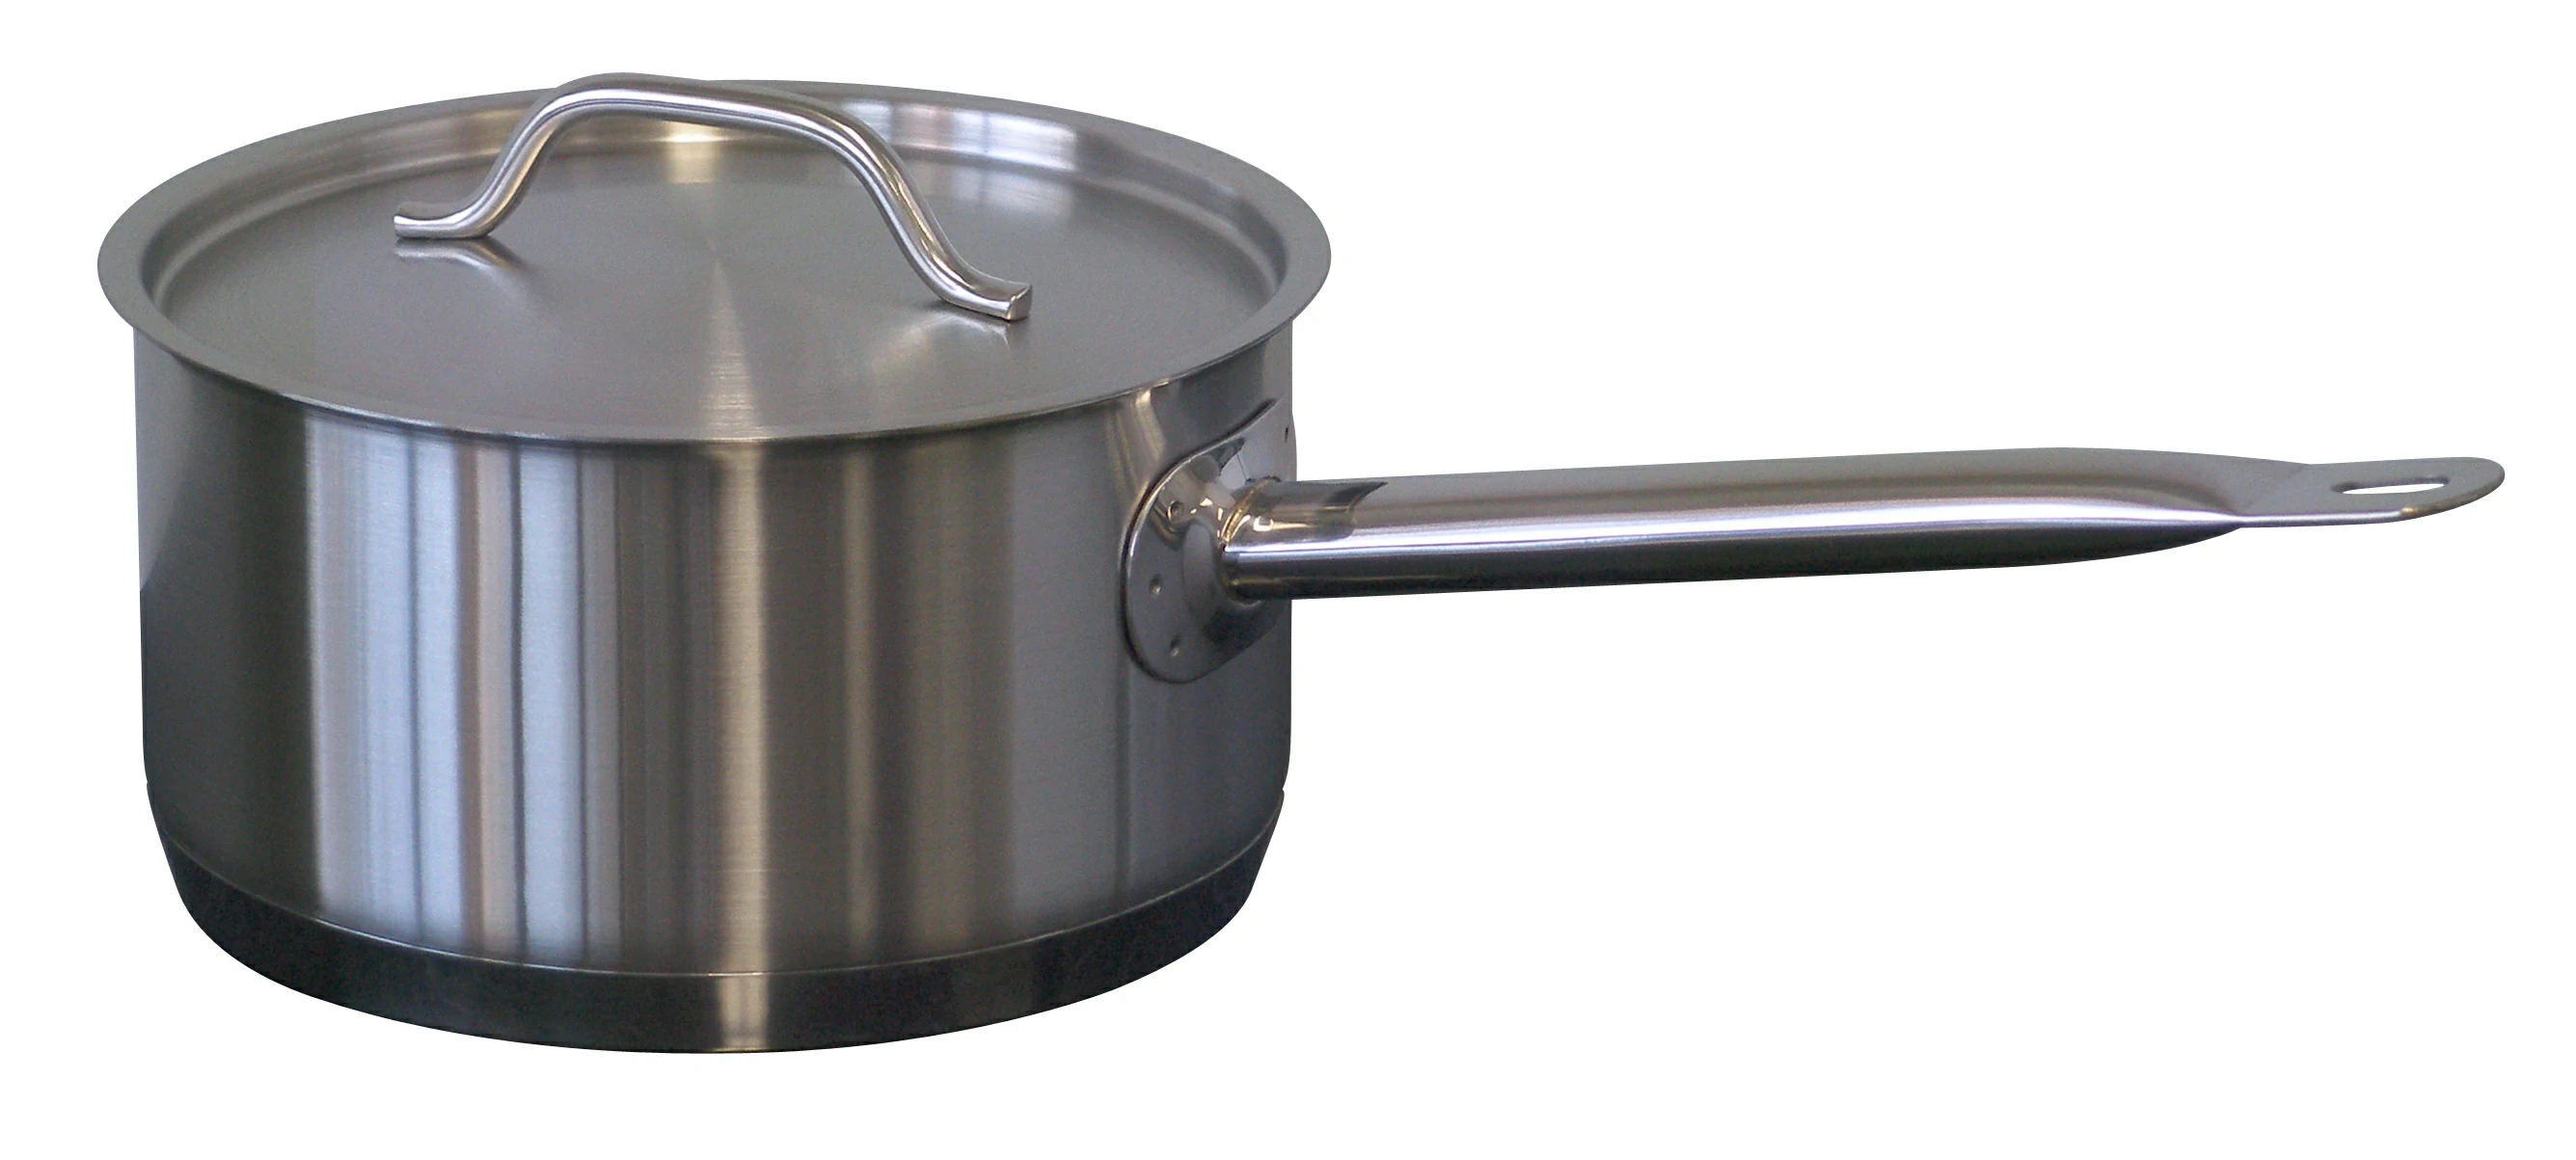 Forje SL3 Stainless steel 3.3 litre low saucepan